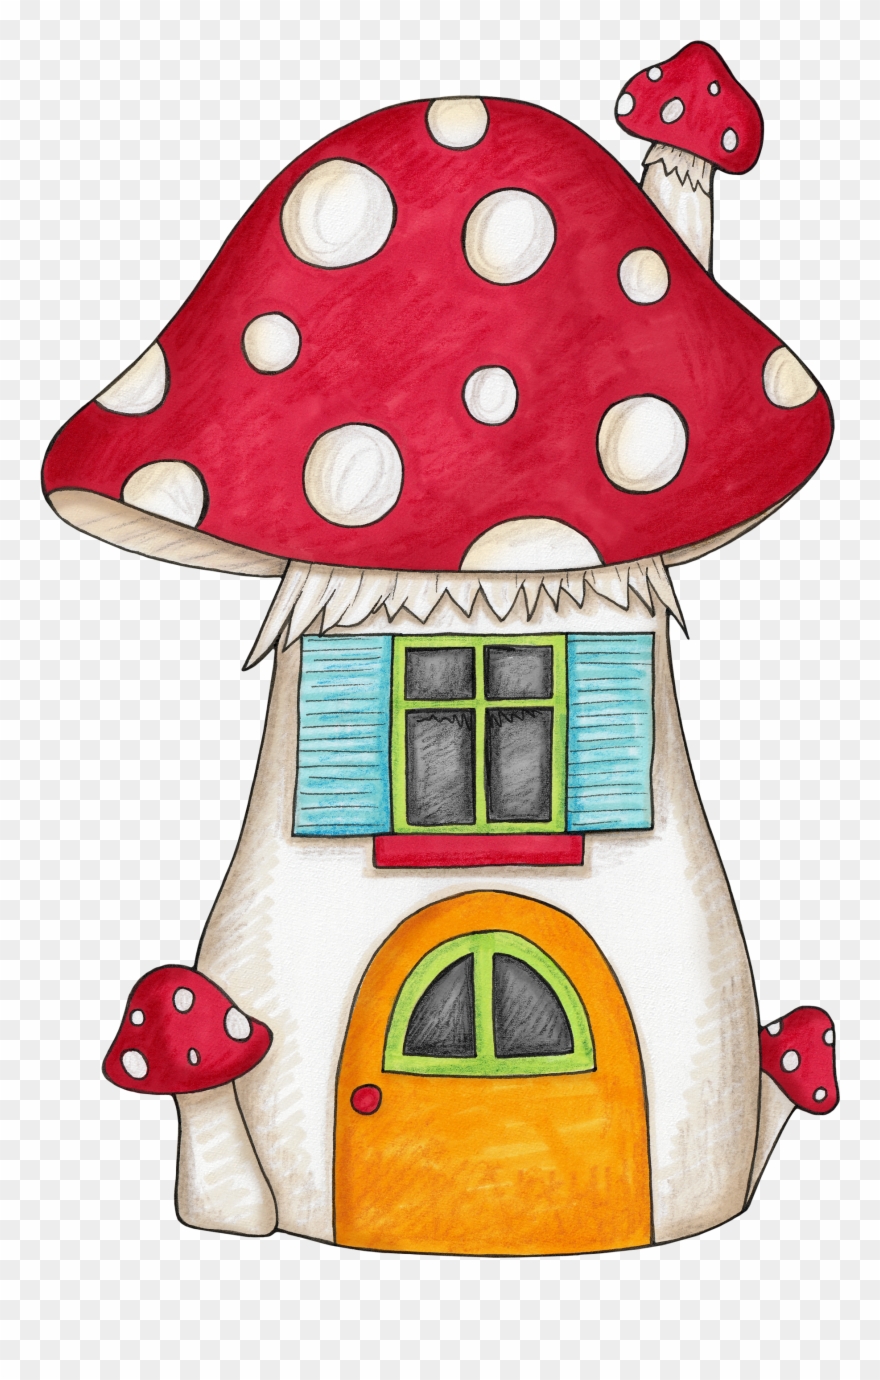 Mushrooms clipart enchanted forest. Mushroom house for an